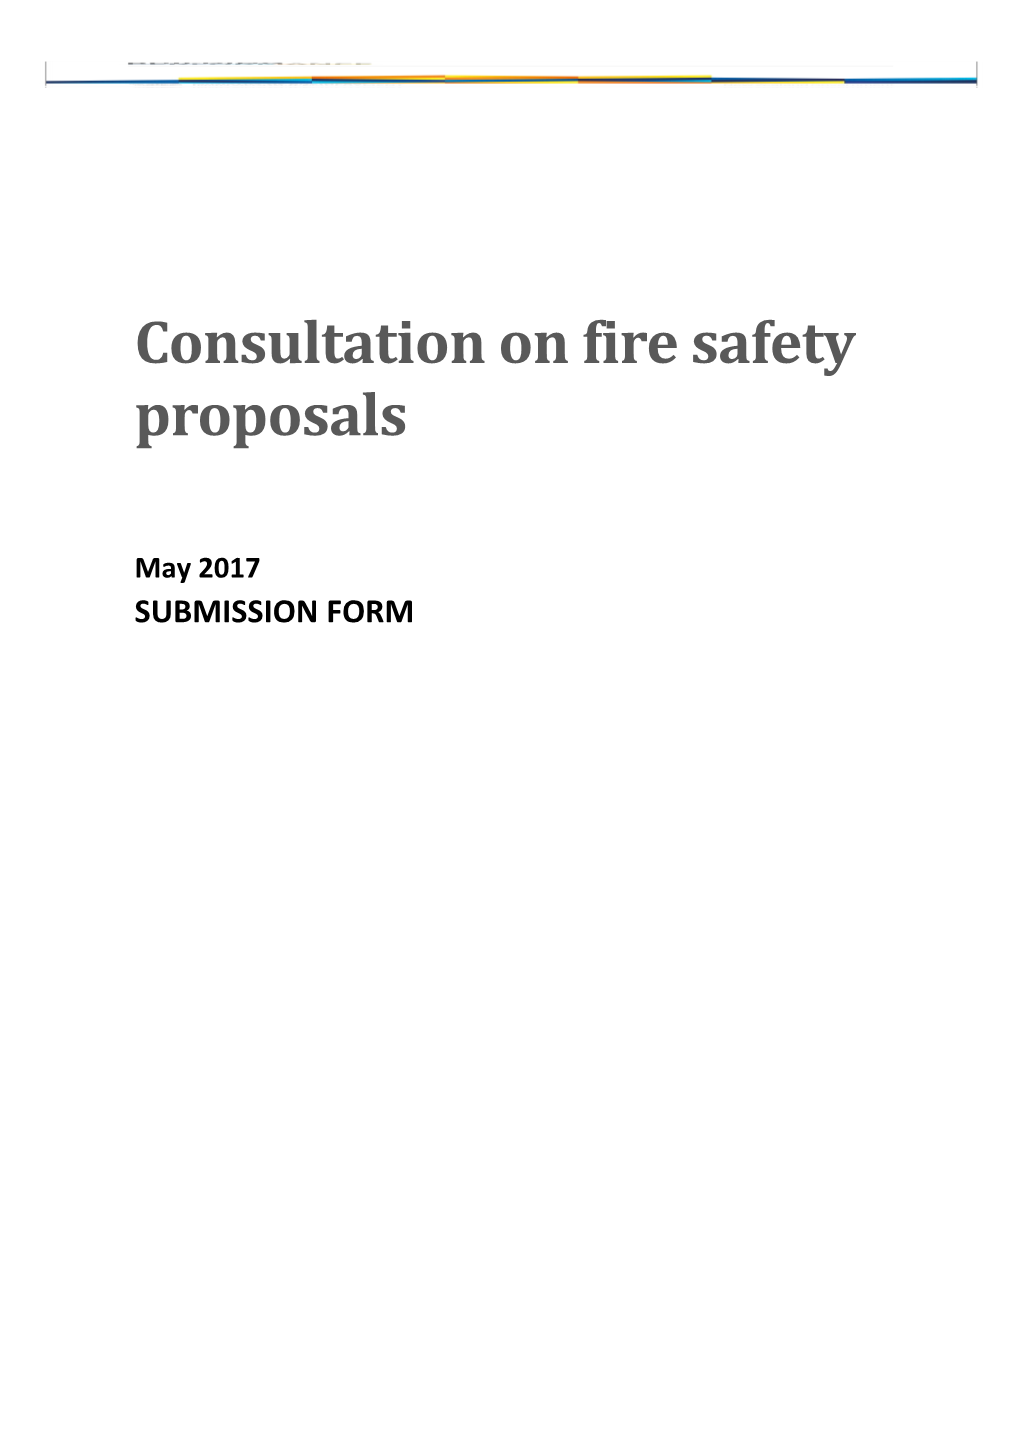 Consultation on Fire Safety Proposals